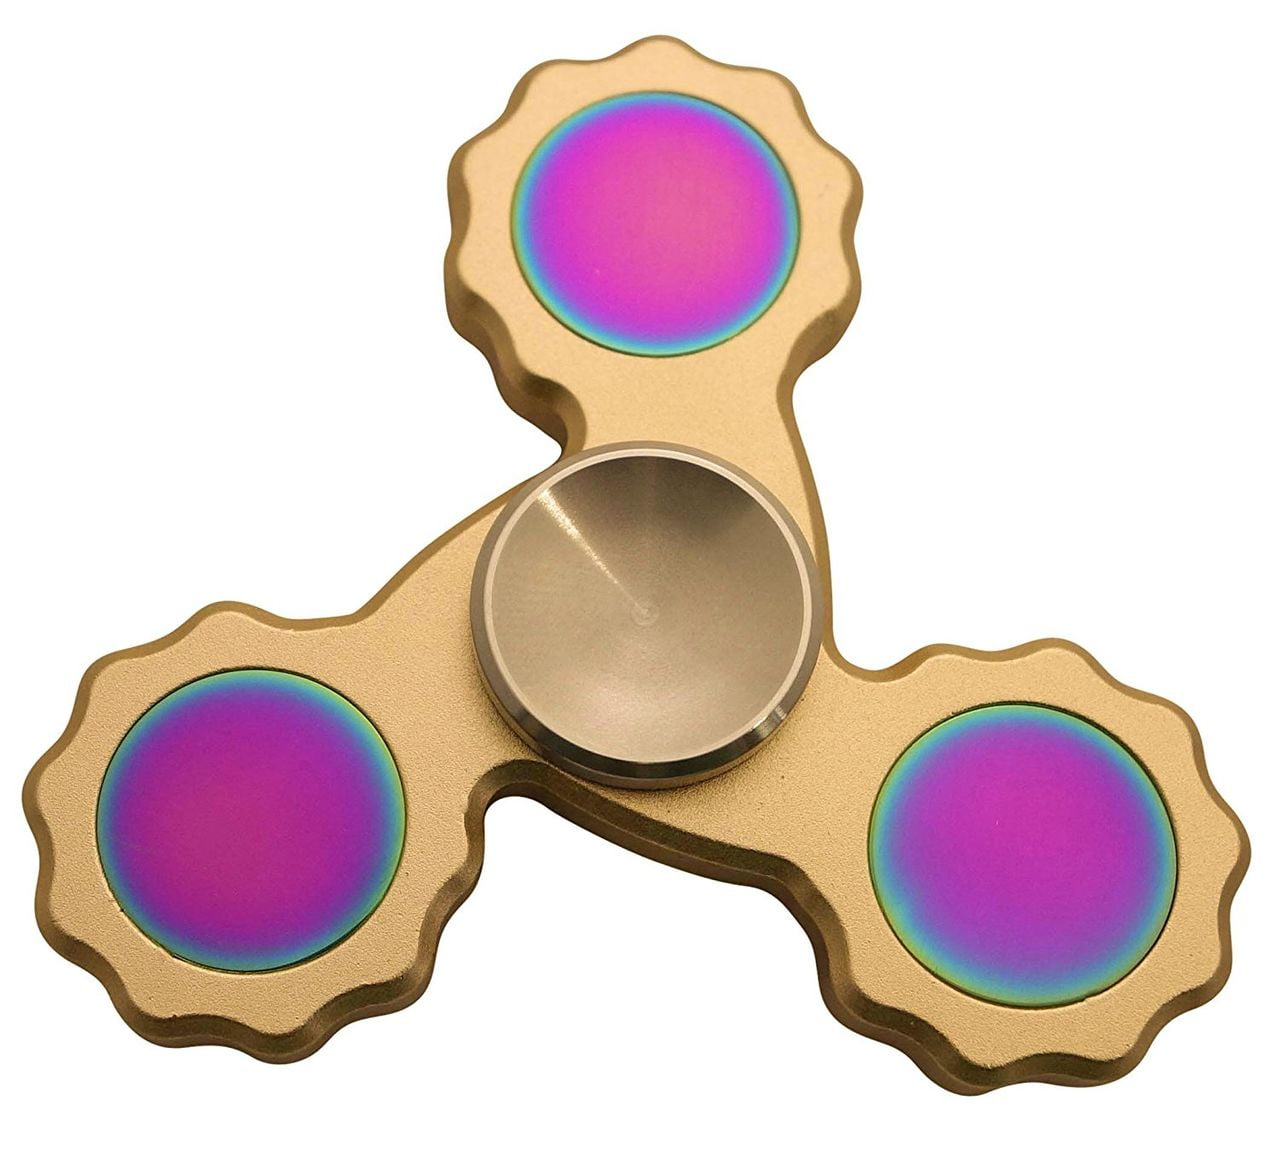 NEW 10 PIECE replacement COLORFUL Hand Spinner Fidget Toy PARTS ship FROM NY 